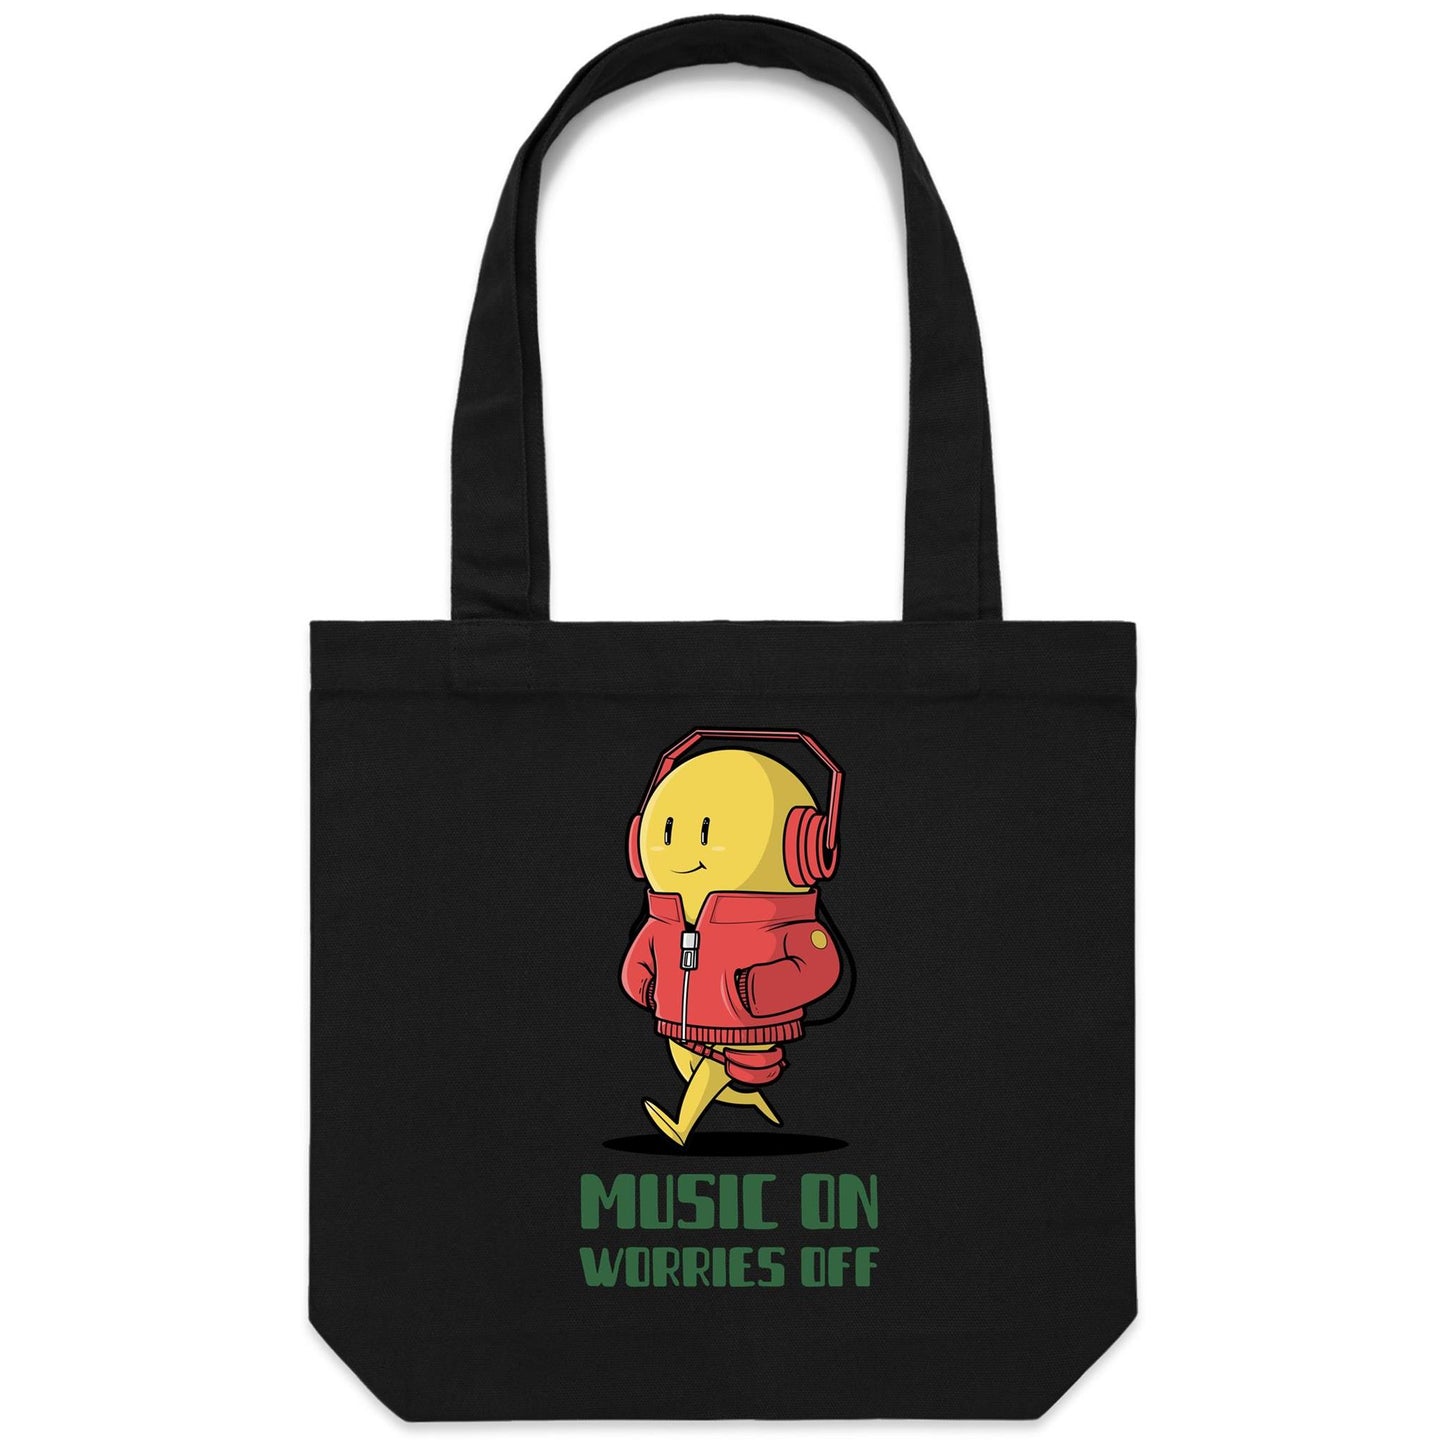 Music On, Worries Off - Canvas Tote Bag Black One Size Tote Bag Music